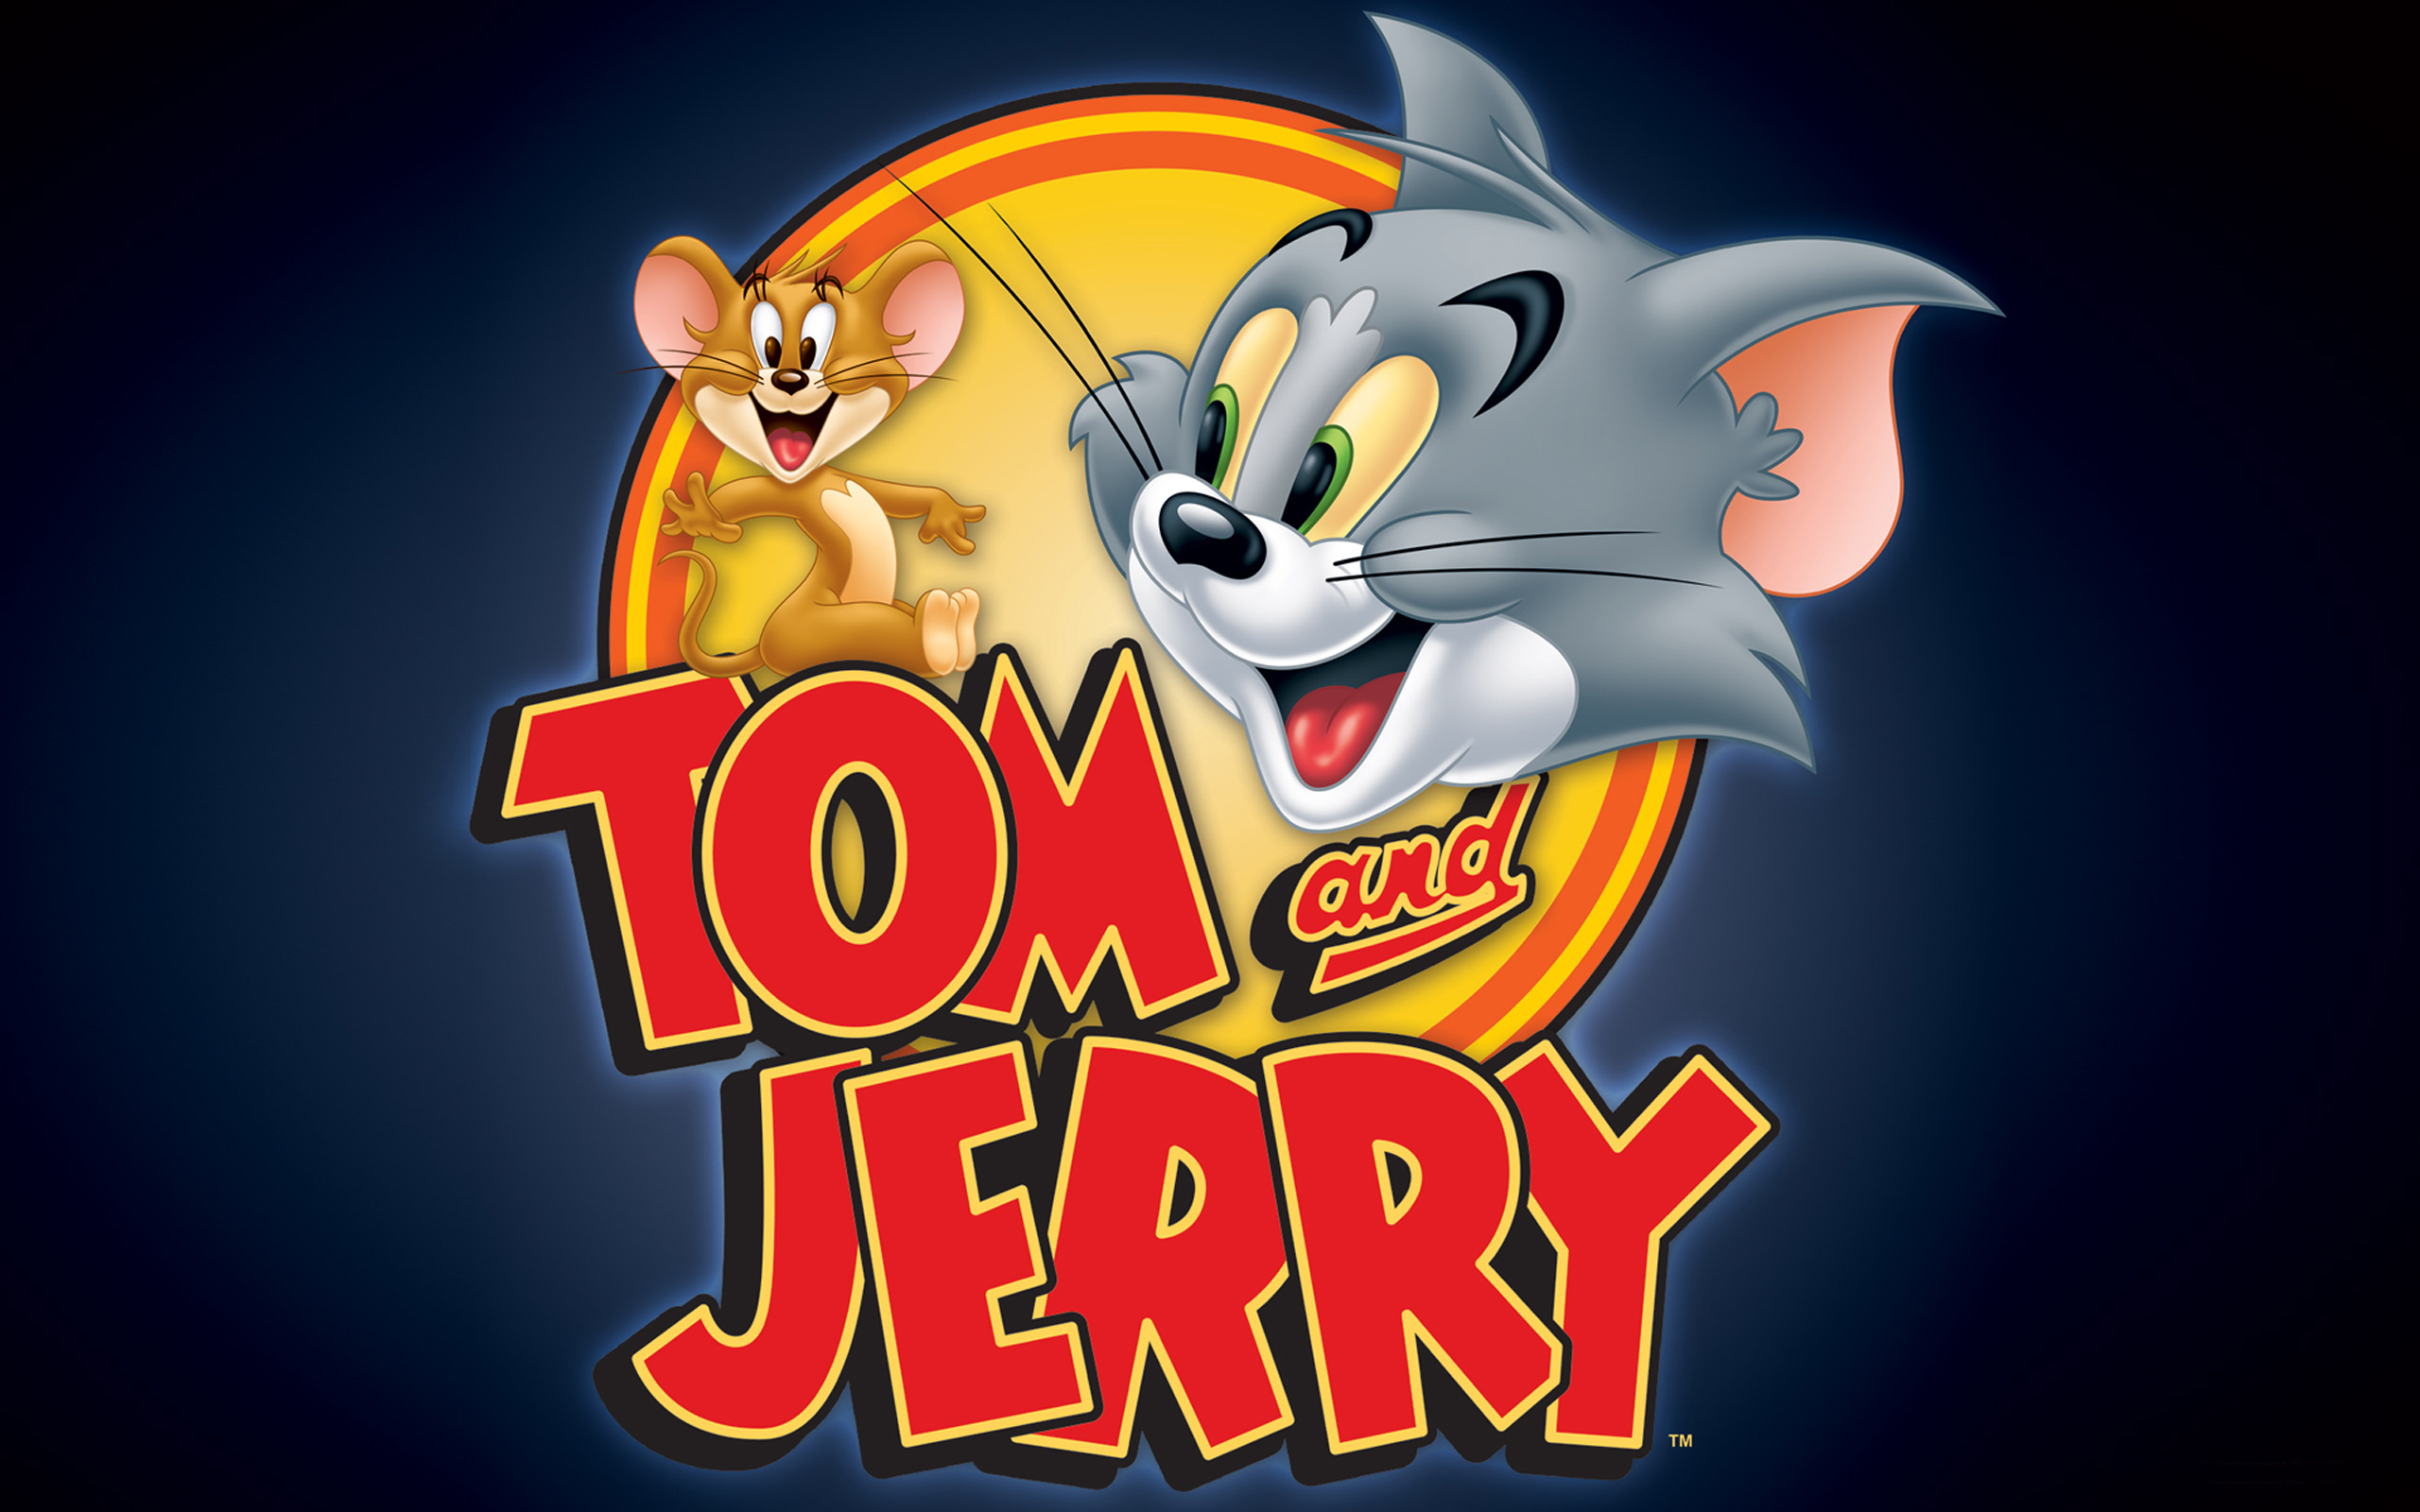 Tom And Jerry-logo-images-Wallpaper Widescreen HD resolution-2560x1600.